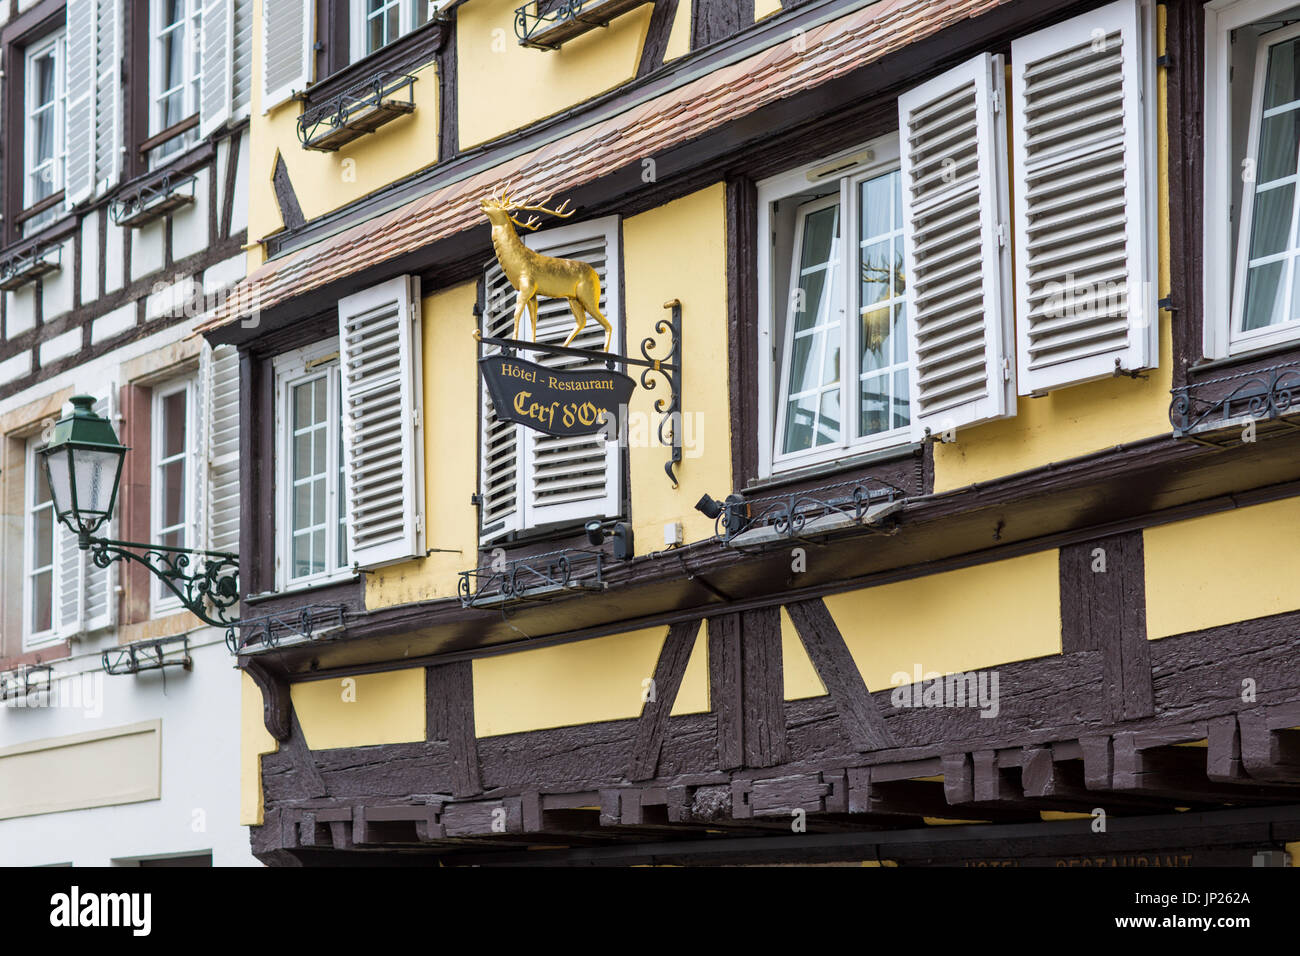 Strasbourg, Alsace, France - May 3, 2014: Hotel Cerf d'Or, typical half timbered building of the Alsace in Strasbourg. Strasbourg is the capital of the Grand Est region (formerly Alsace) of France and the official seat of the European Union. Stock Photo